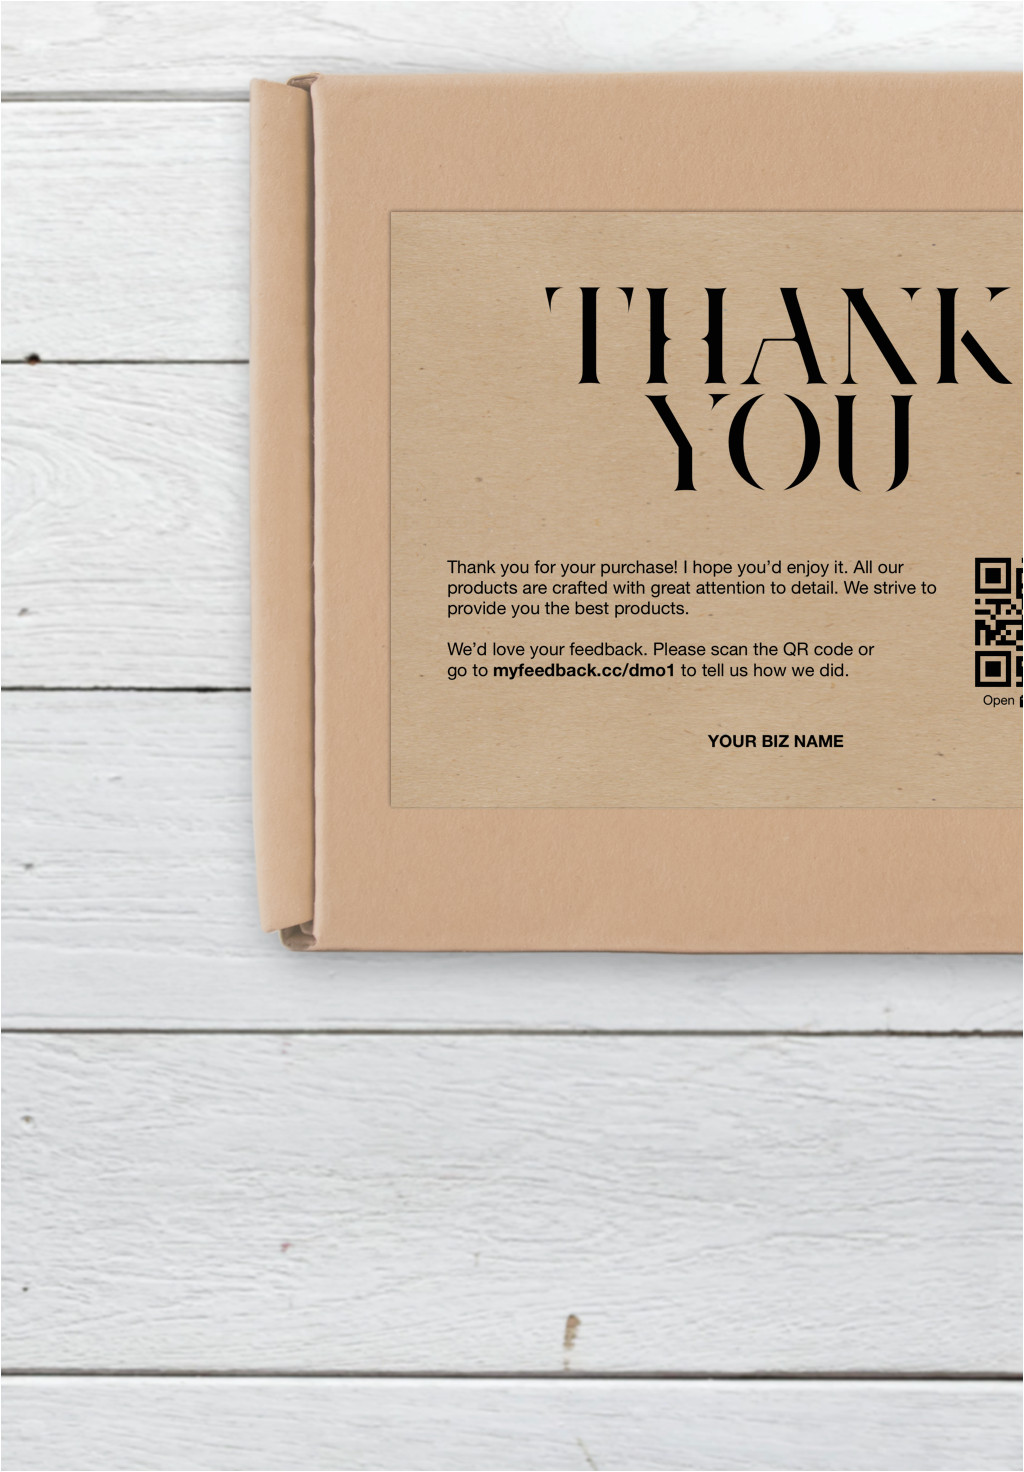 Image Of Thank You Card Business Thank You Card Thank You for Your Purchase